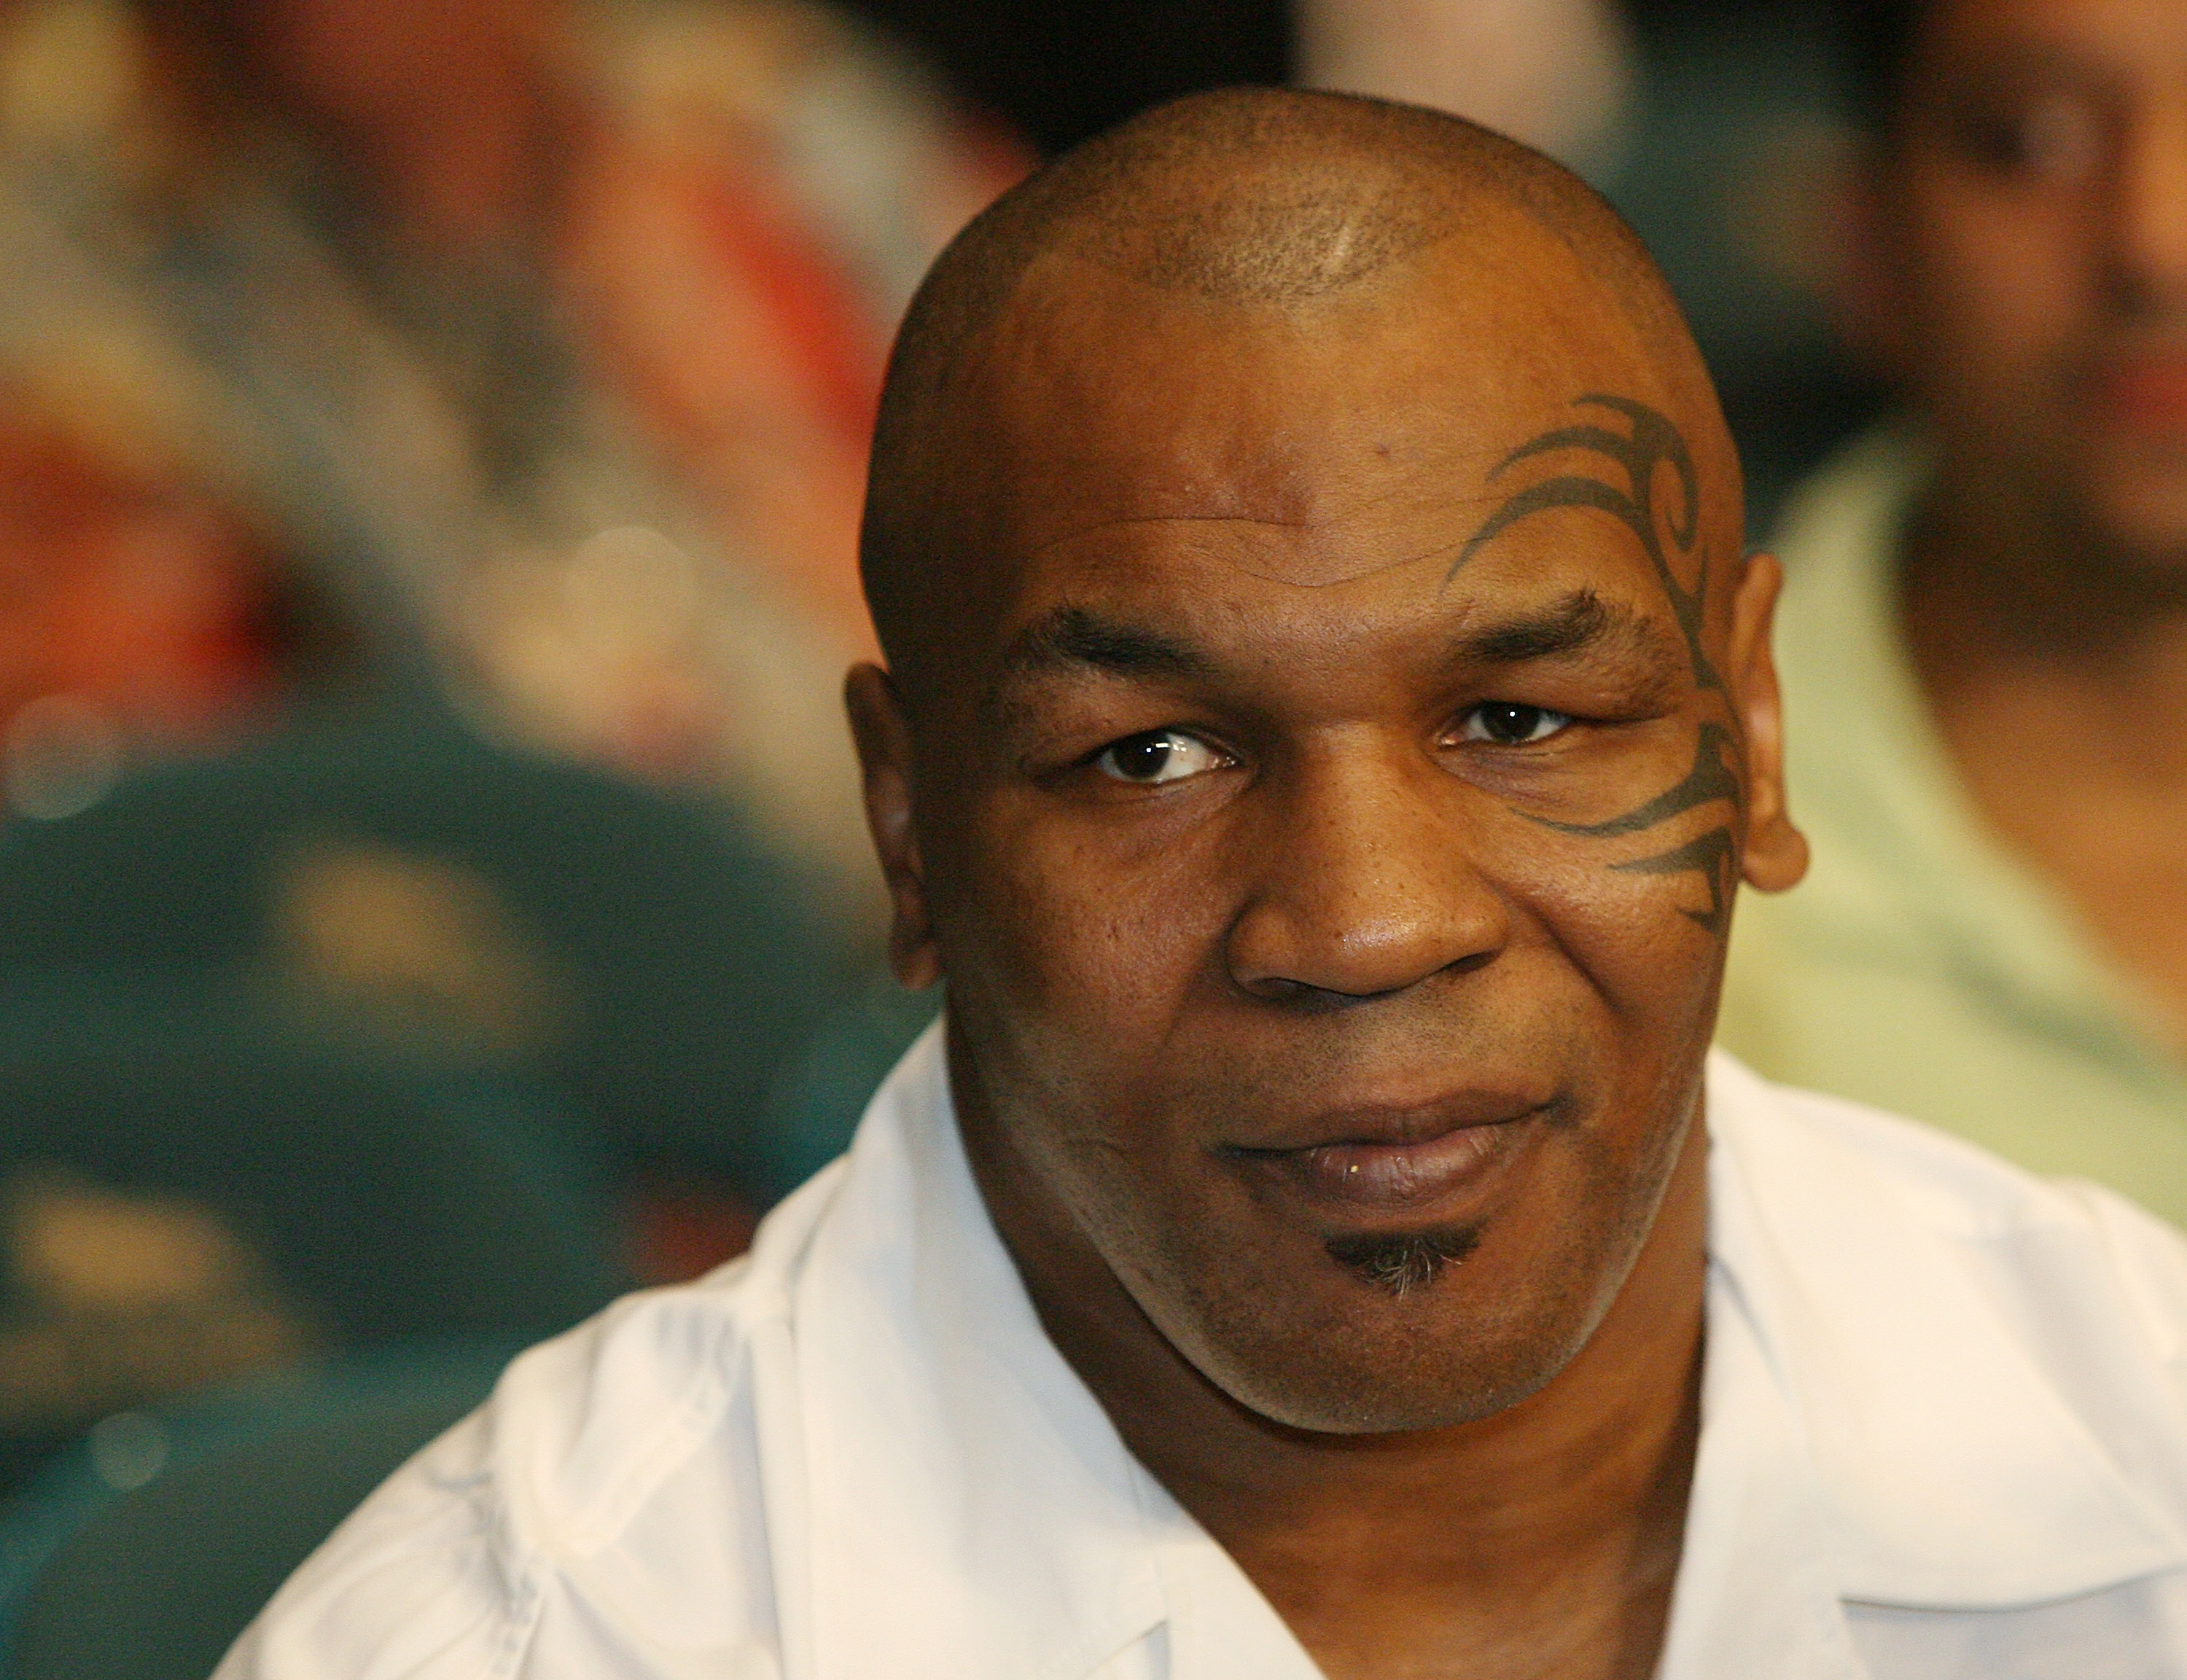 LAS VEGAS - JULY 26:  Former boxer Mike Tyson sits in the crowd before the interim WBA light flyweight title fight between Cesar Canchila and Giovani Segura at the MGM Grand Garden Arena July 26, 2008 in Las Vegas, Nevada.  (Photo by Ethan Miller/Getty Im